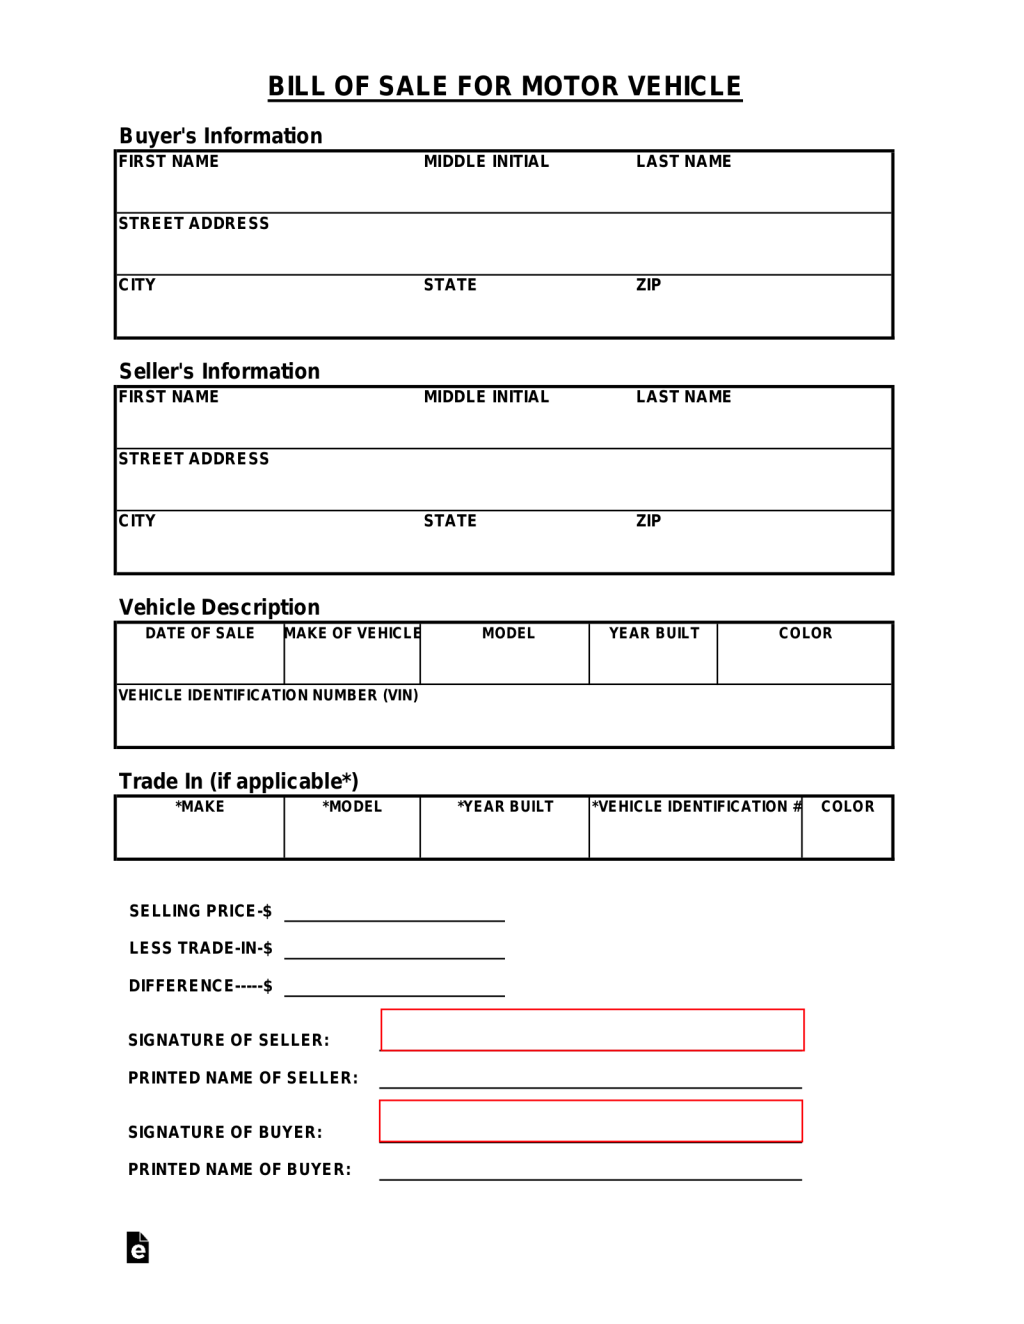 Picture of: Free Tennessee Motor Vehicle Bill of Sale Form – PDF – eForms